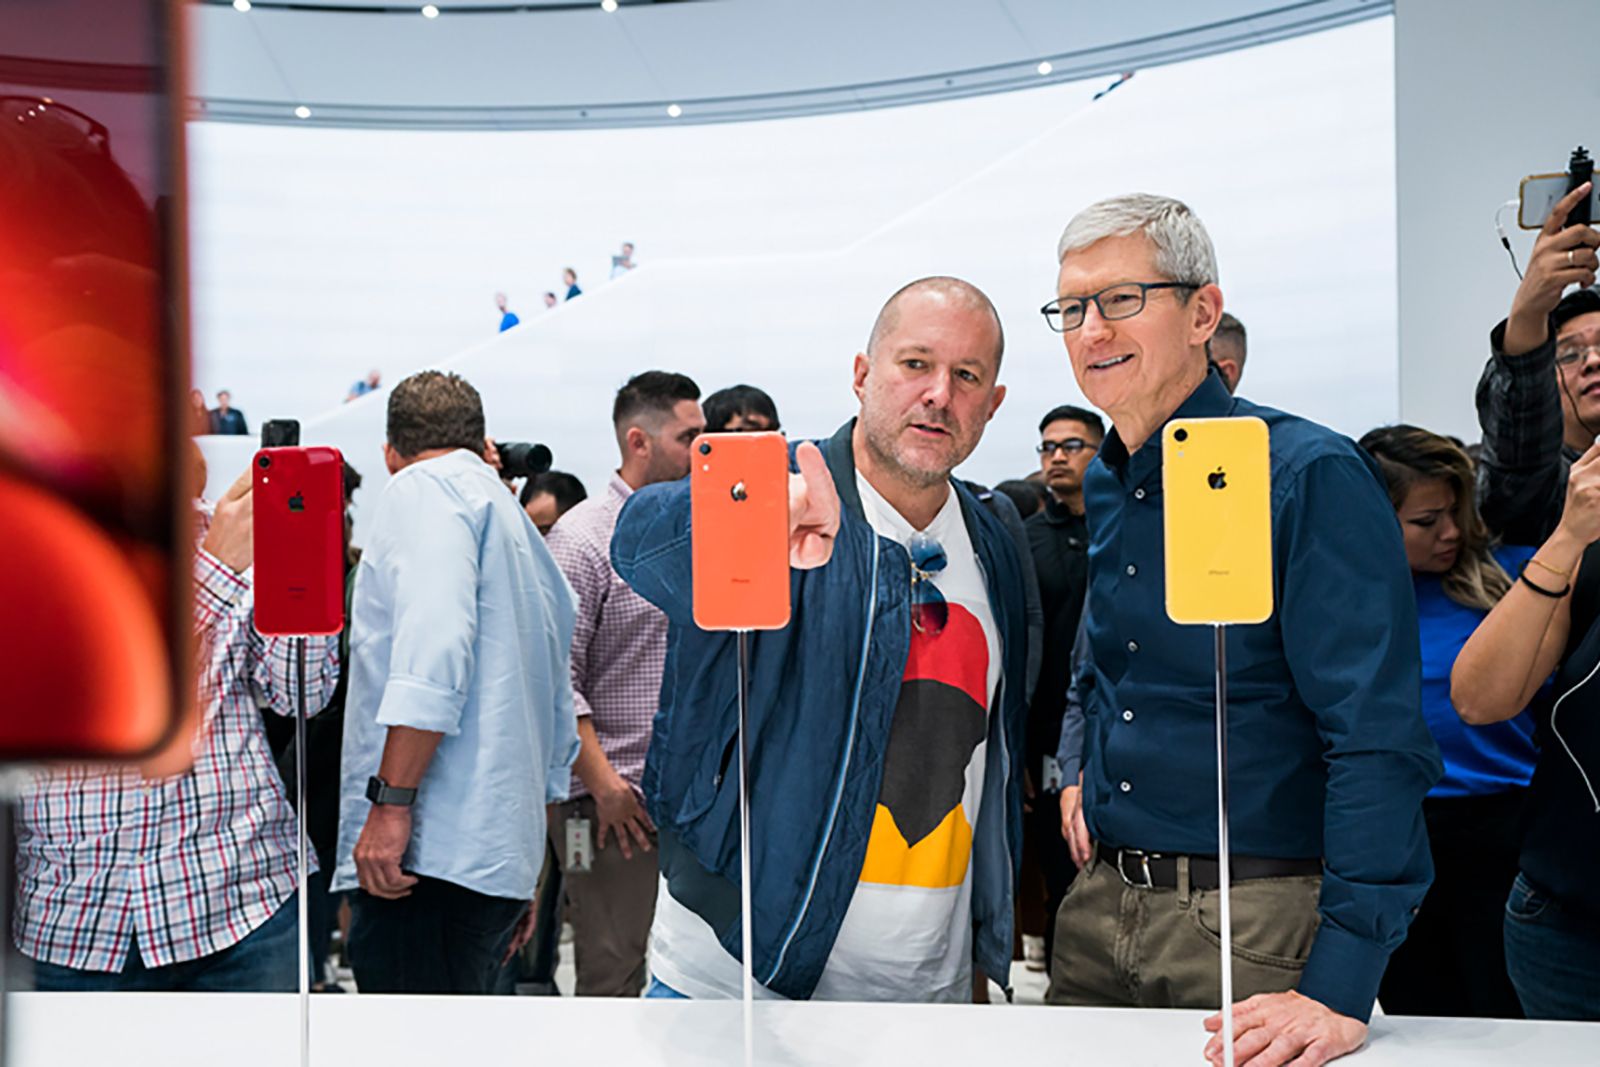 Jony Ive Is Leaving Apple After Nearly Three Decades To Start A Design Company image 3